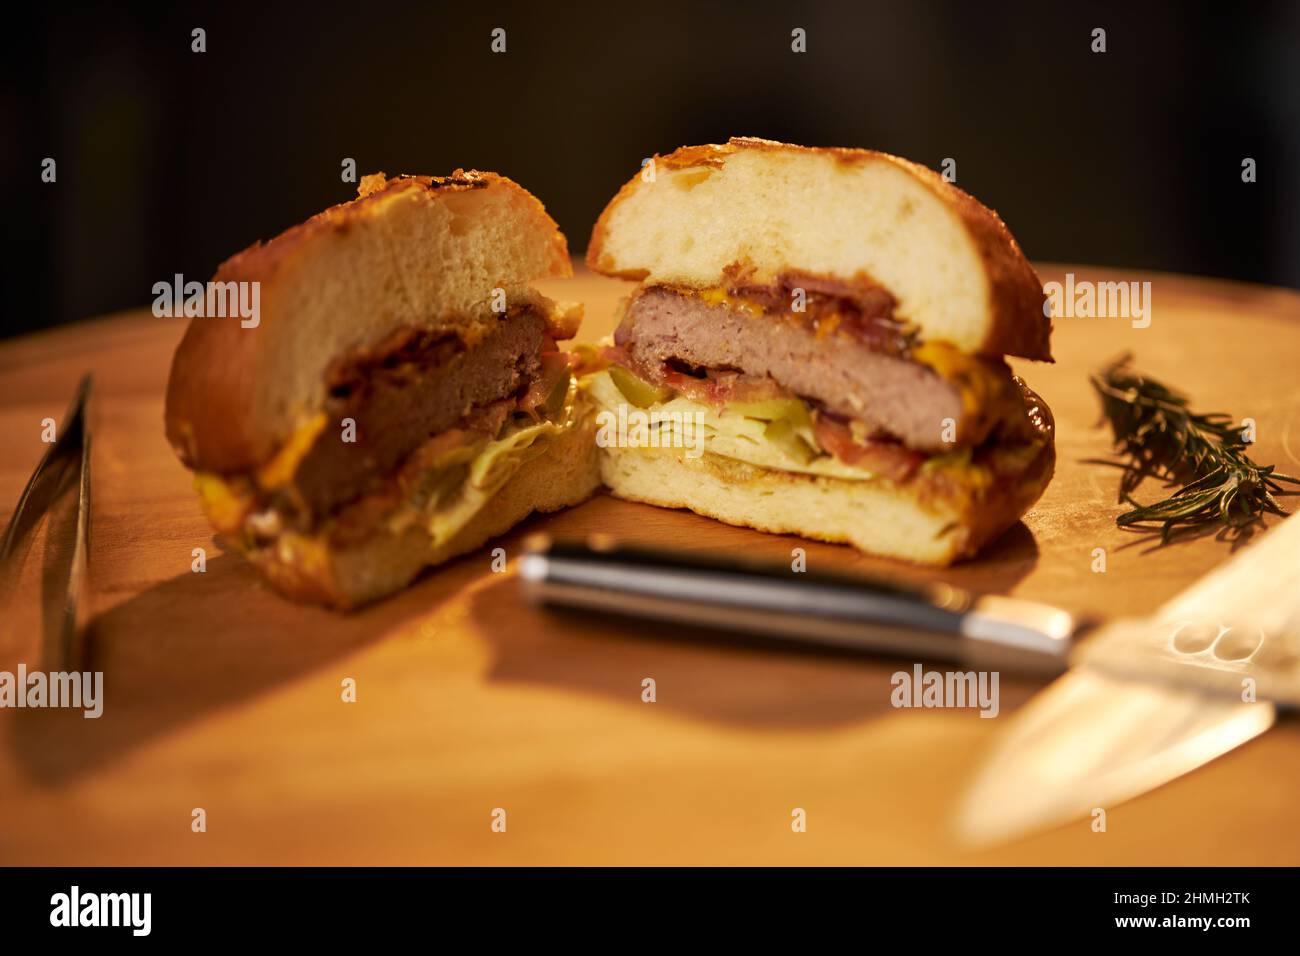 Close up view of grilled beef burger cut in half with knives on cutting board. Juicy homemade cheeseburger with salad, onion and stick of rosemary on wooden board. Concept of fast food.  Stock Photo